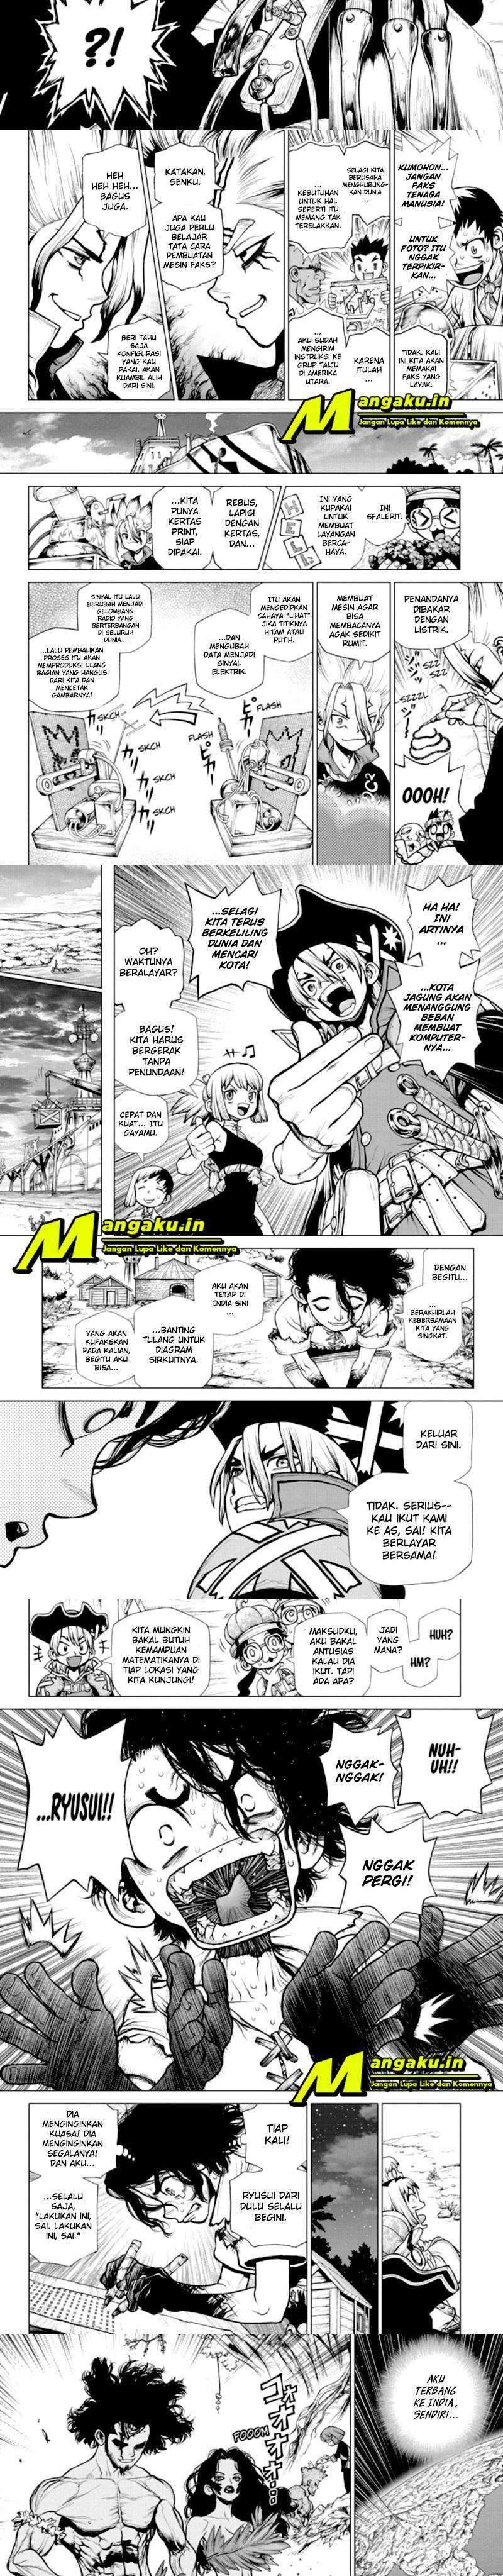 Dr. Stone Chapter 207